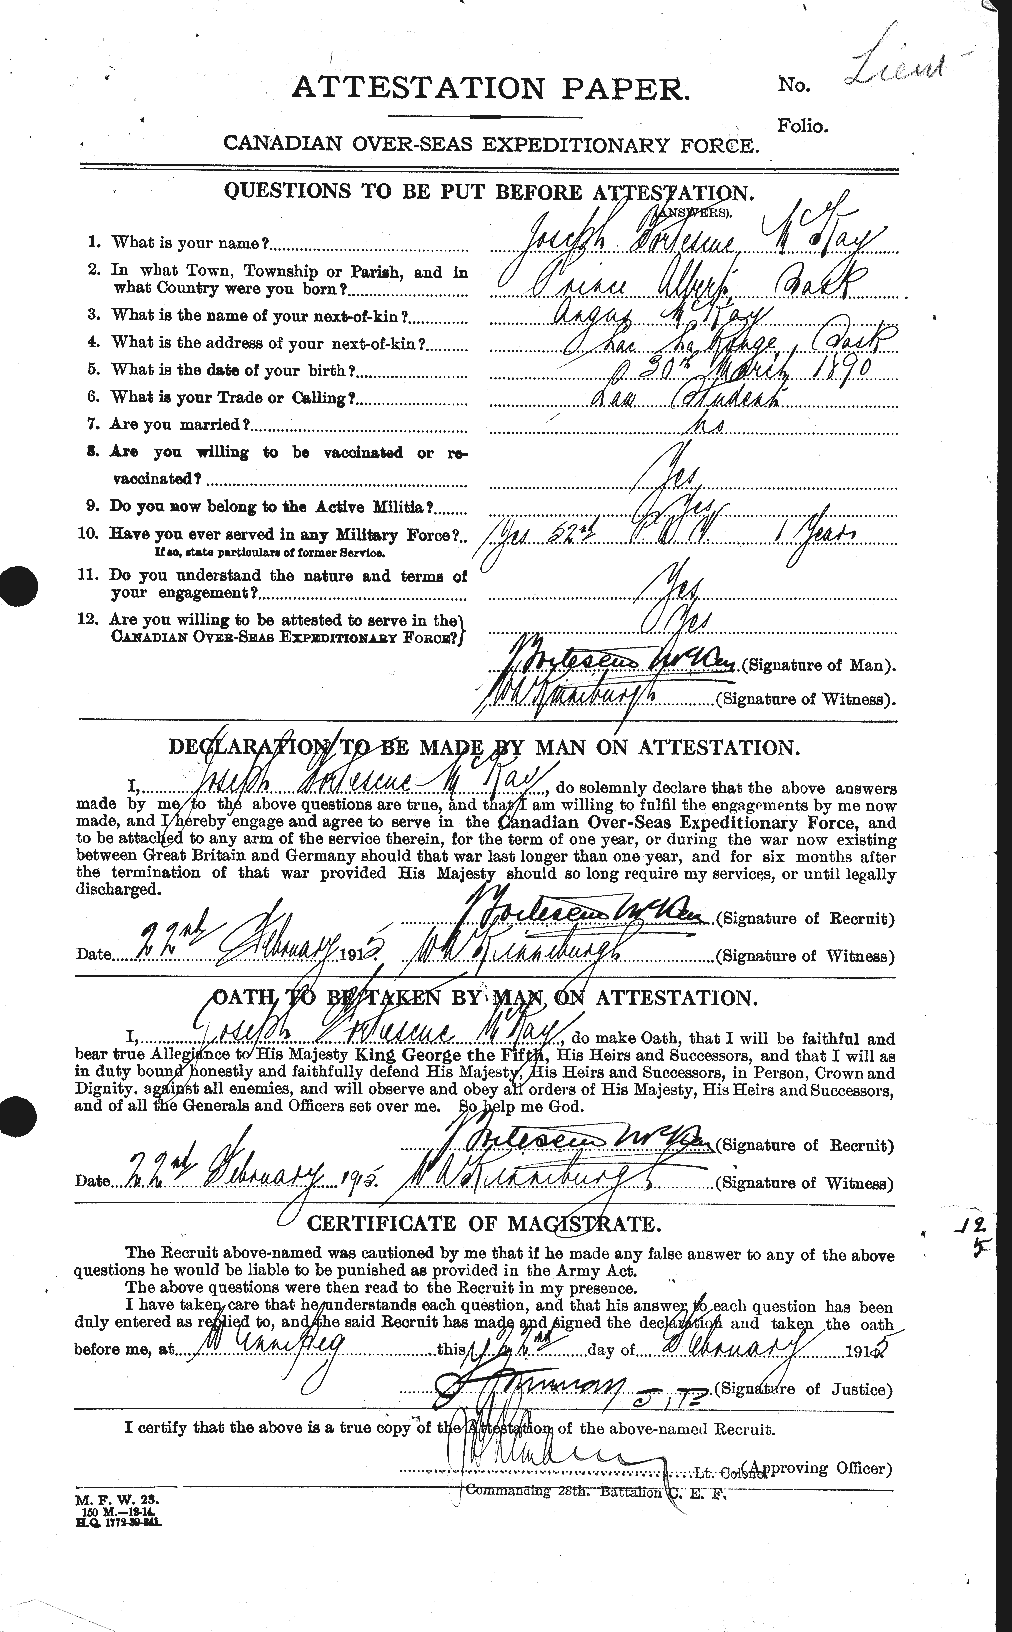 Personnel Records of the First World War - CEF 527114a